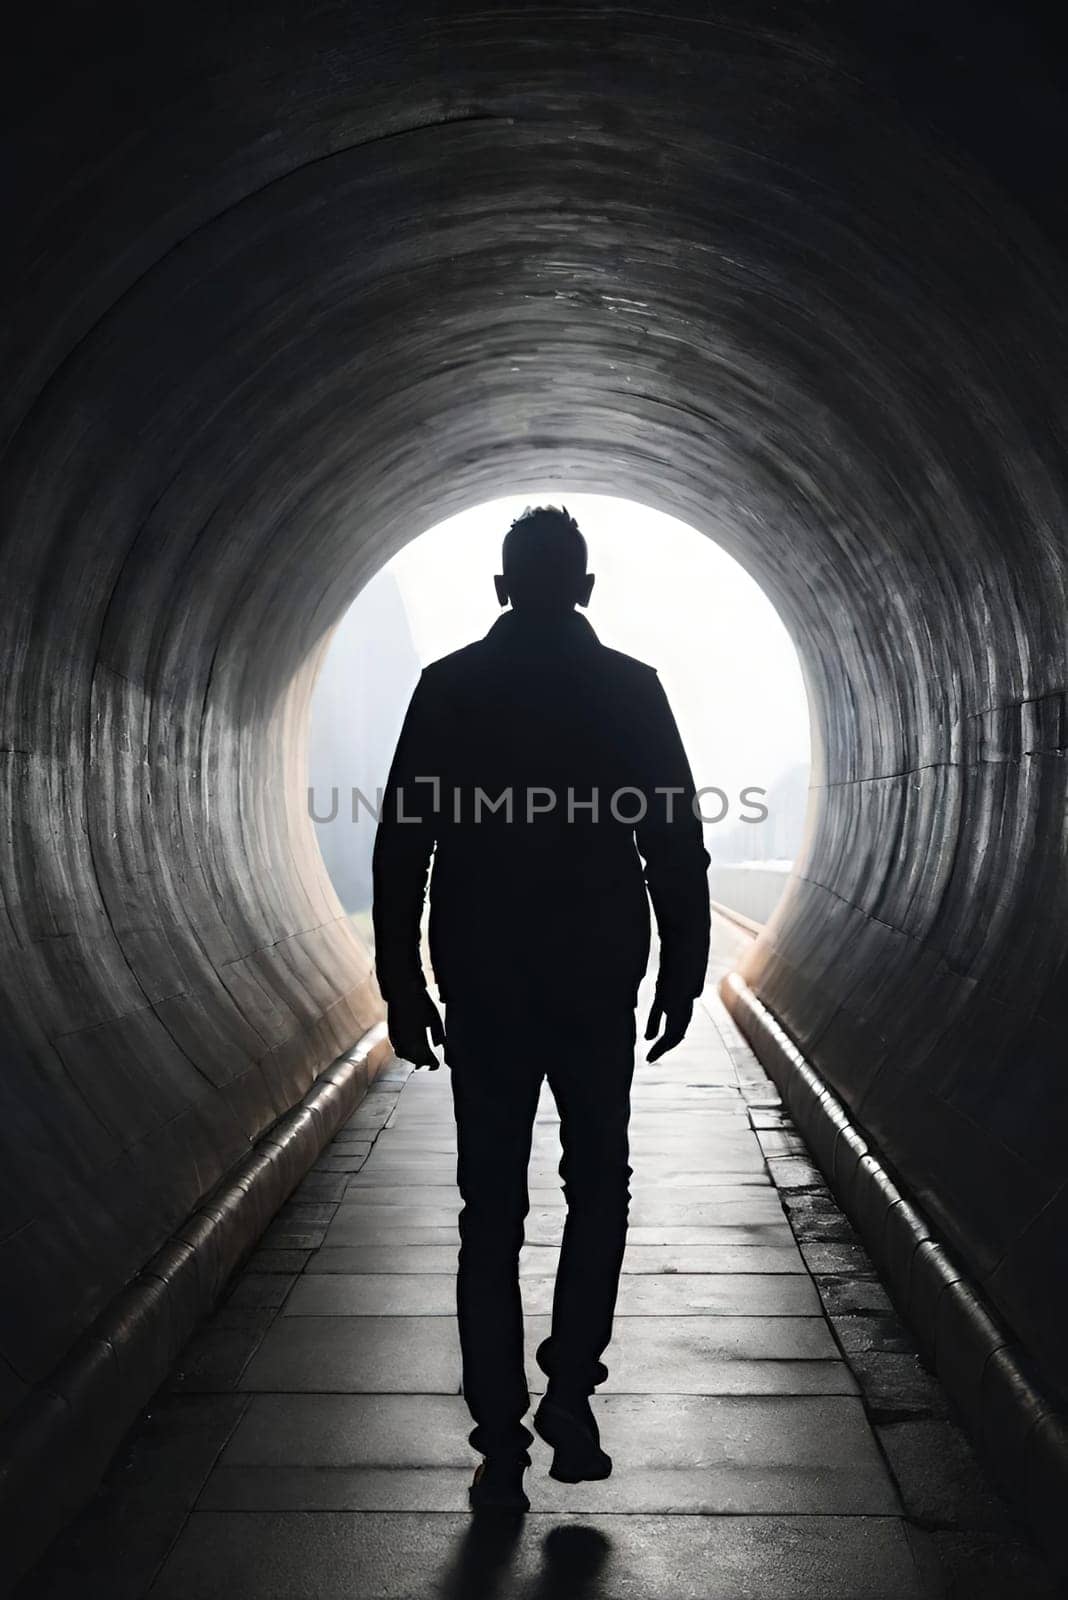 Silhouette of a man in a dark tunnel. Conceptual image. Business concept.Silhouette of a man standing in a dark tunnel with light.Silhouette of a man walking through a tunnel with light coming through.Man standing in a tunnel looking at the light coming from the end.